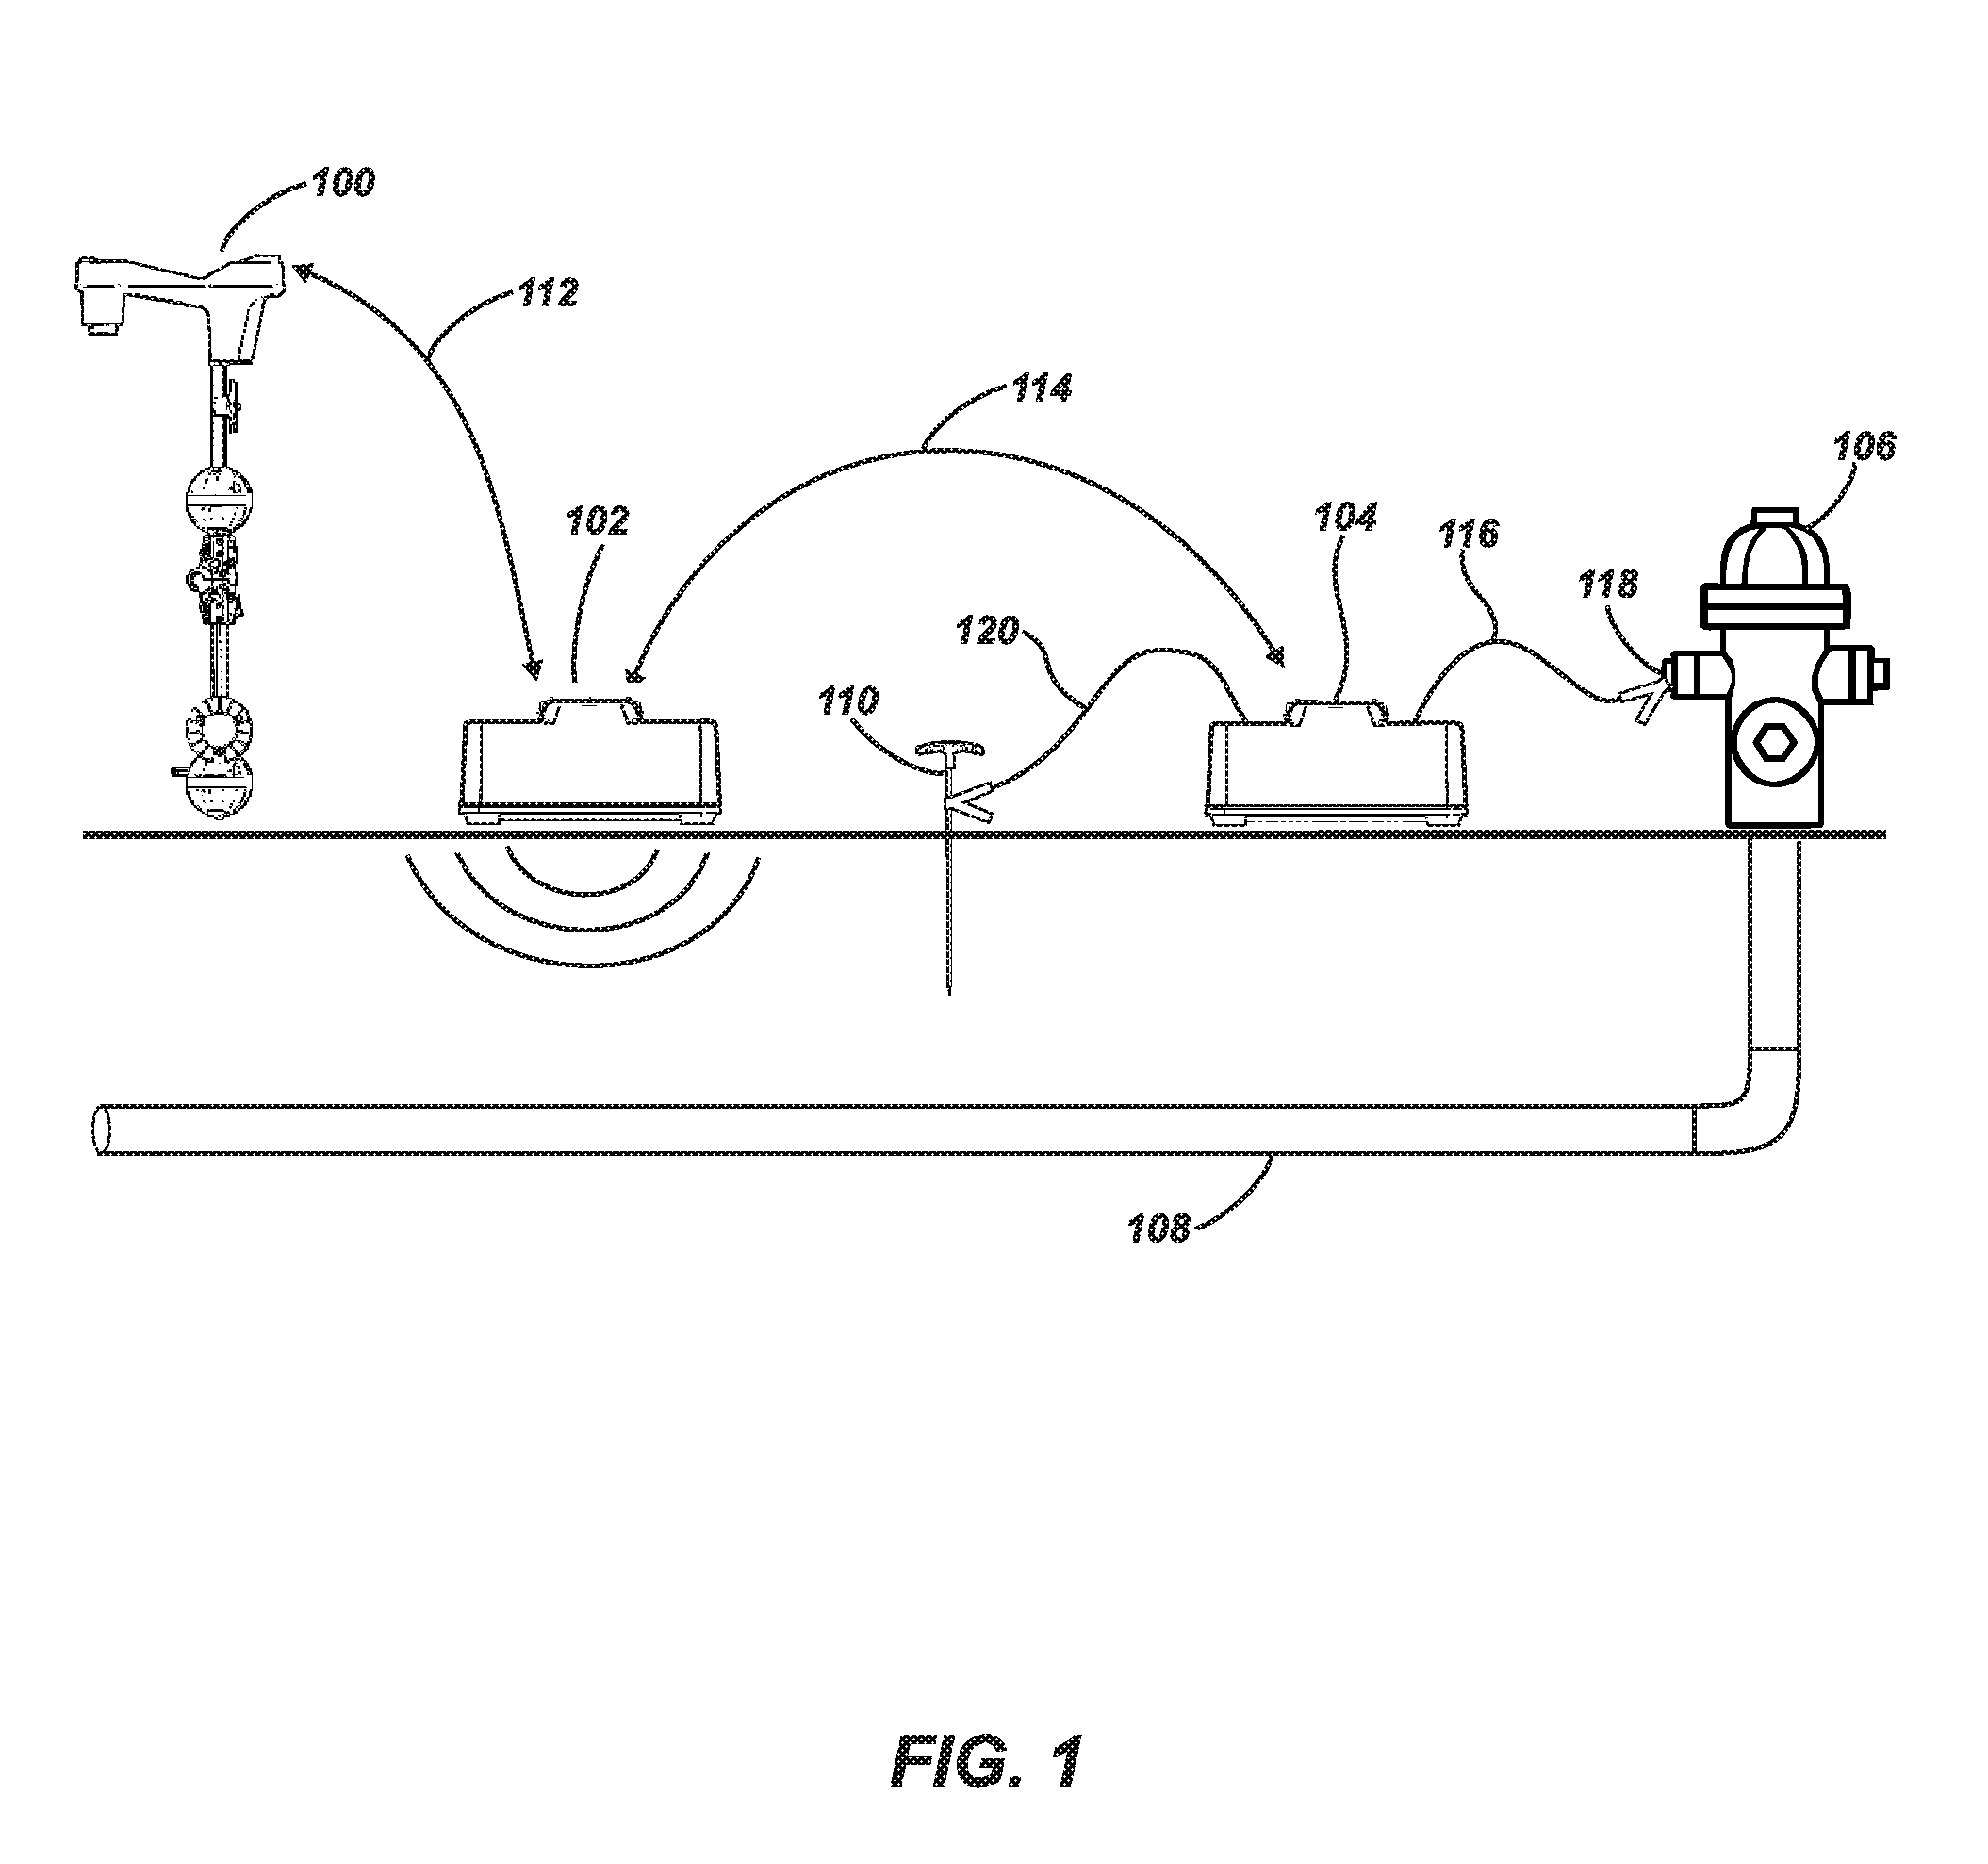 System and method for locating buried pipes and cables with a man portable locator and a transmitter in a mesh network